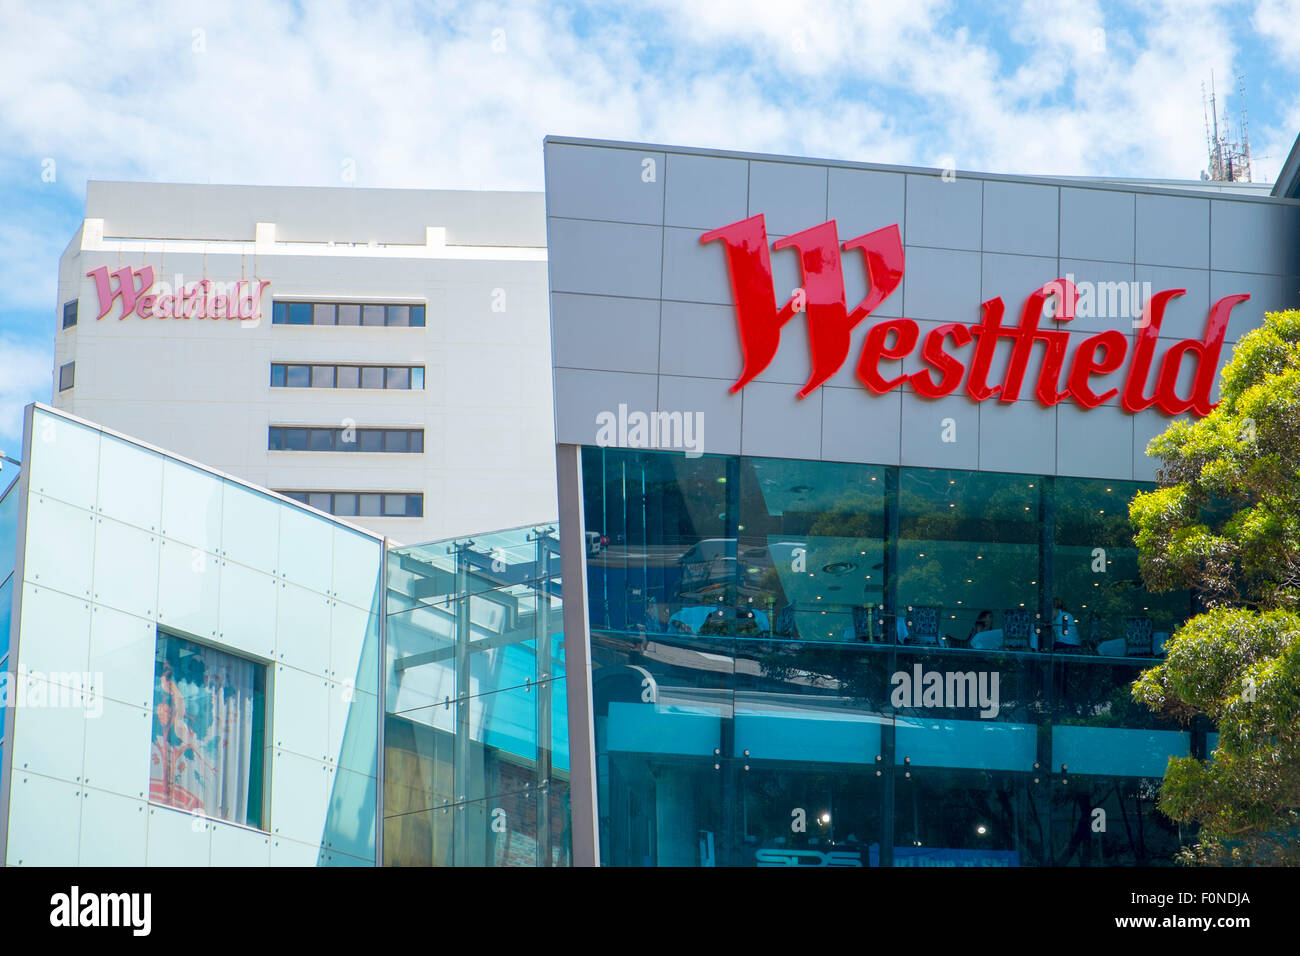 Photos at Westfield Bondi Junction - 82 tips from 10170 visitors